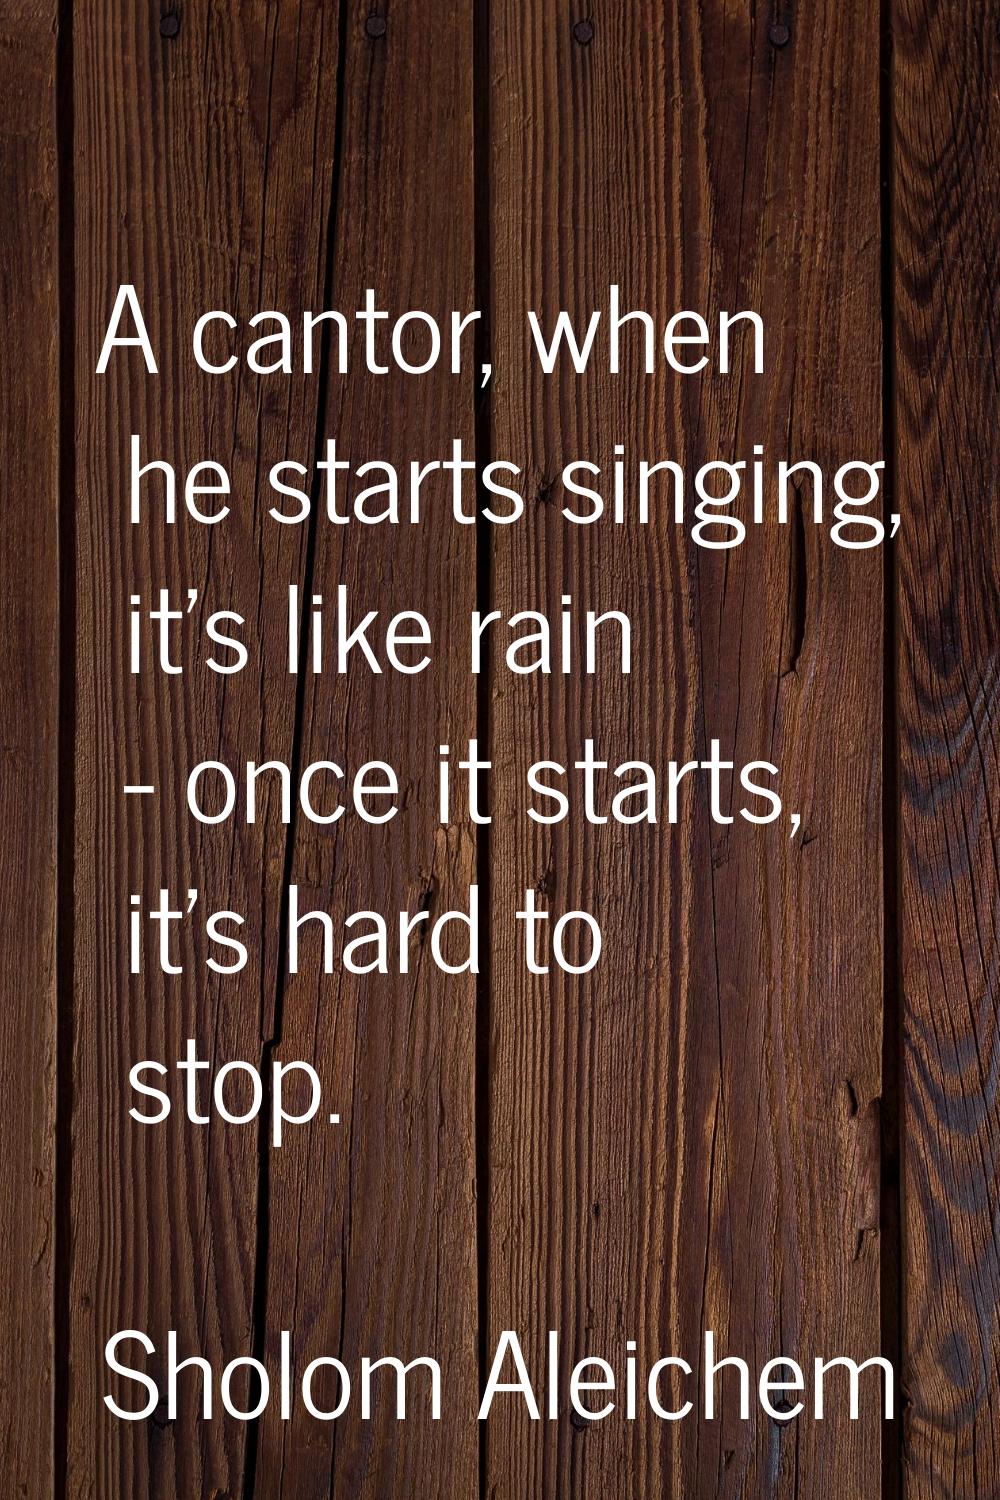 A cantor, when he starts singing, it's like rain - once it starts, it's hard to stop.